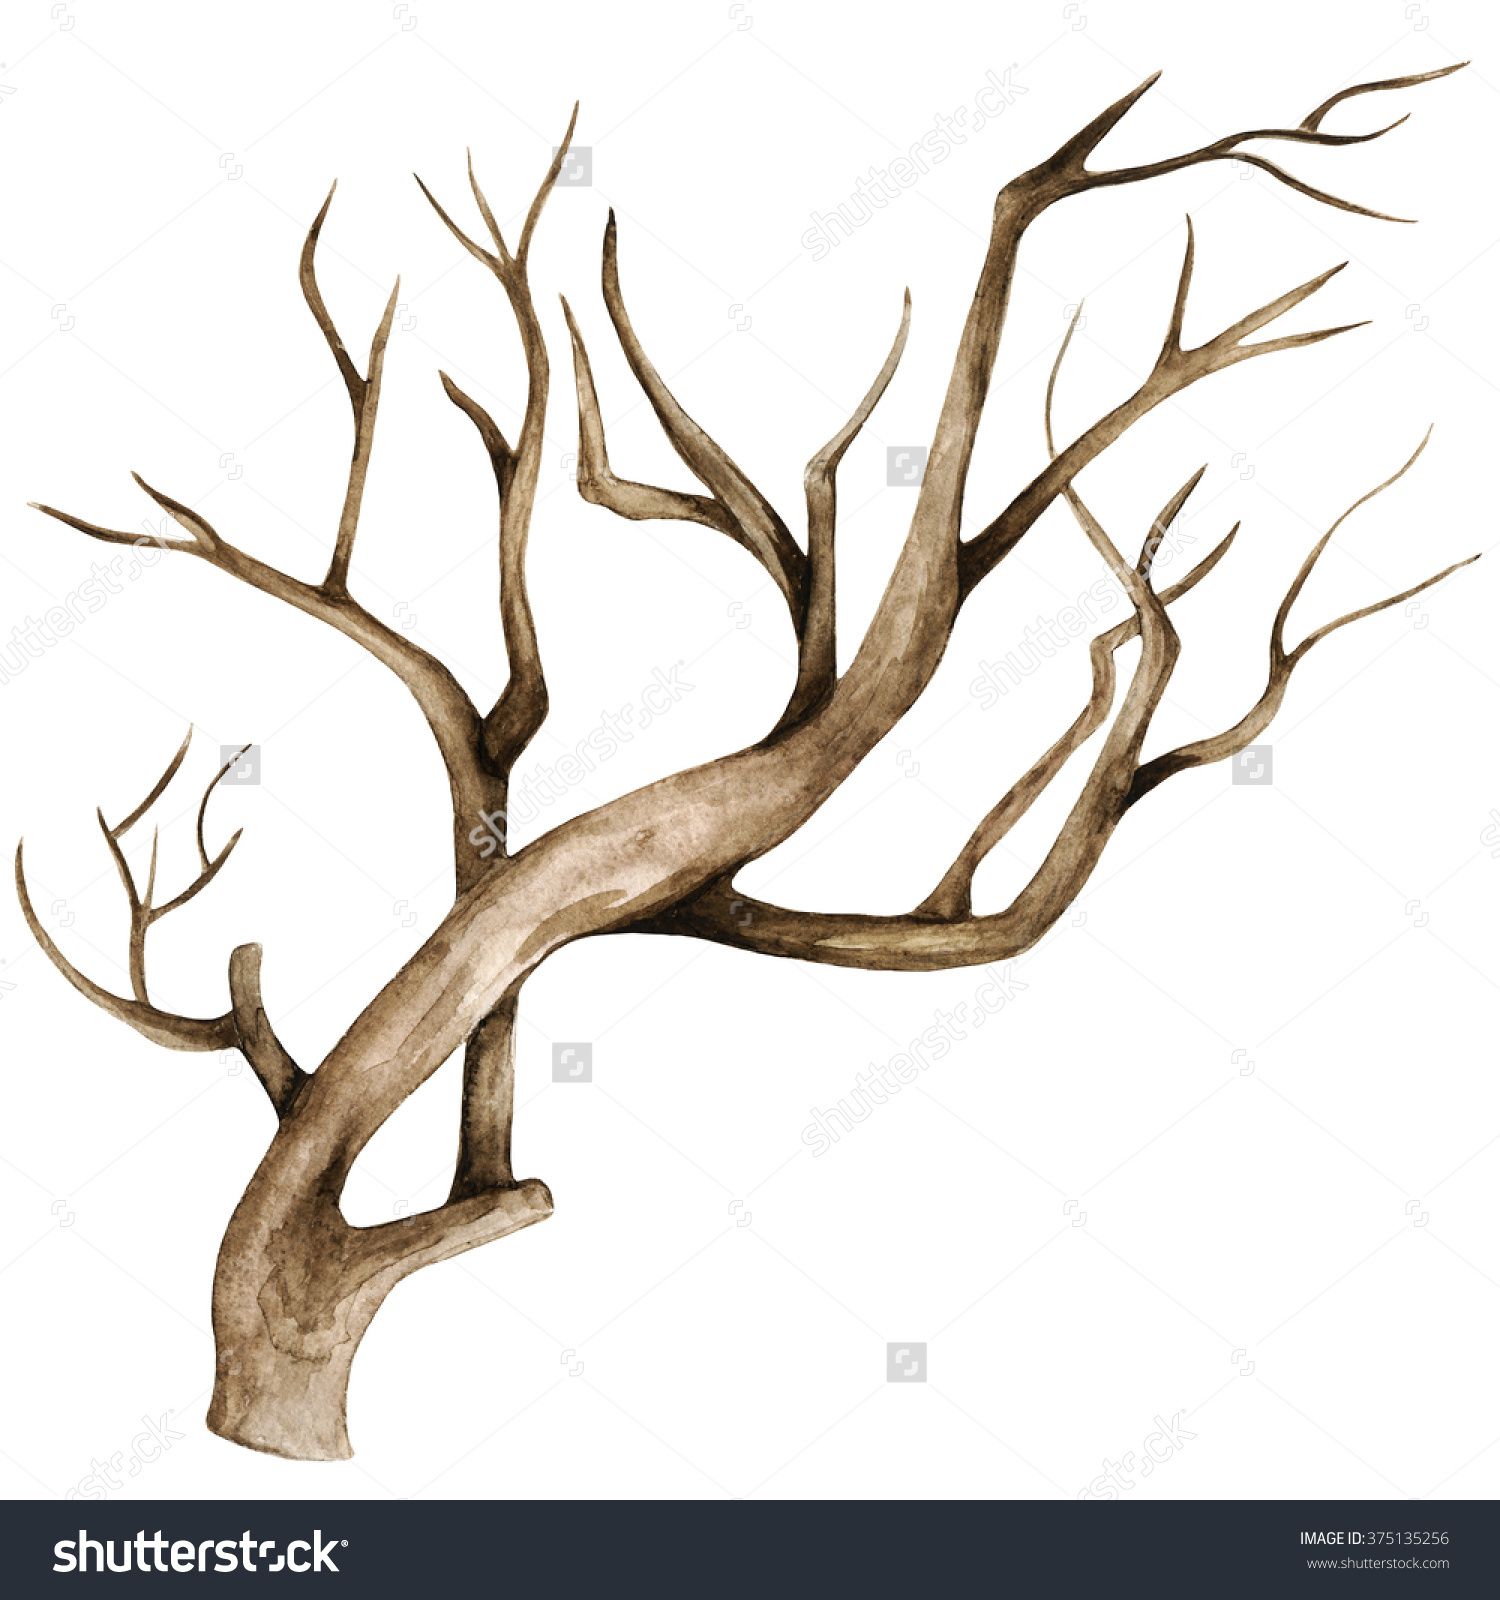 Dry Tree Drawing at GetDrawings.com | Free for personal use Dry Tree ...